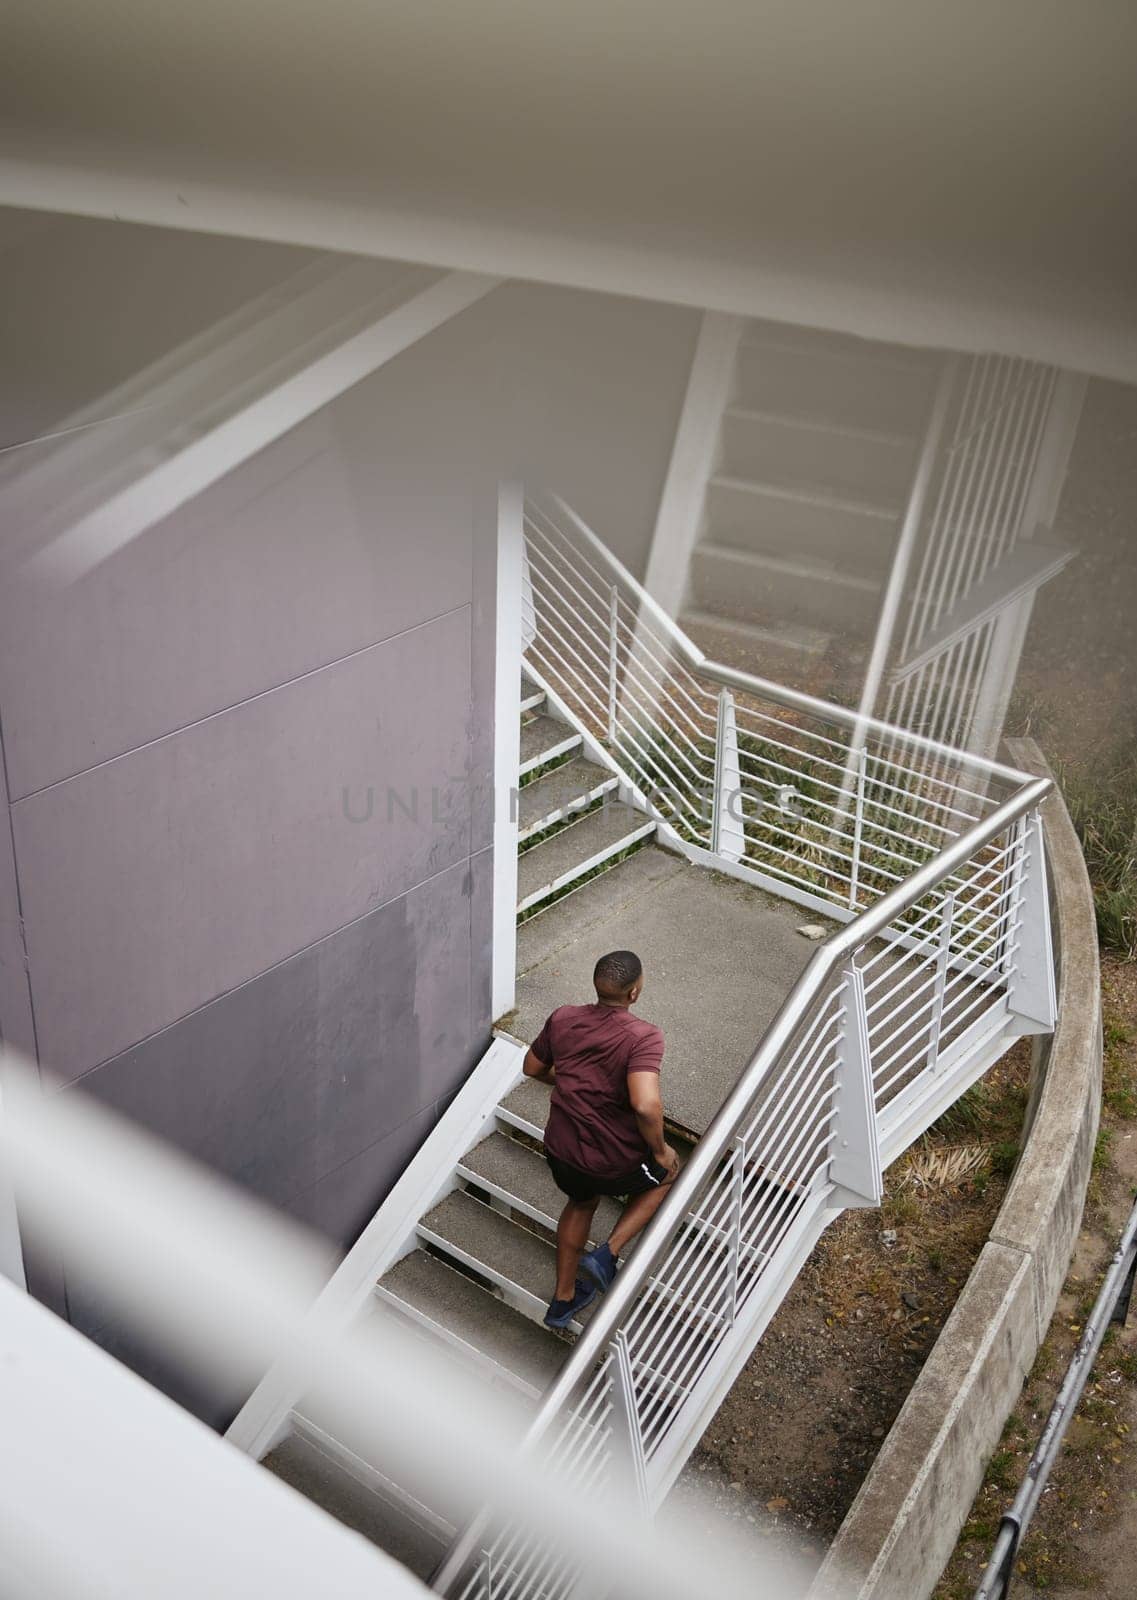 Running, fitness and top view of black man on stairs for health, wellness and exercise. Sports, training and male runner jog, exercising or cardio workout on steps outdoors for strength and endurance.